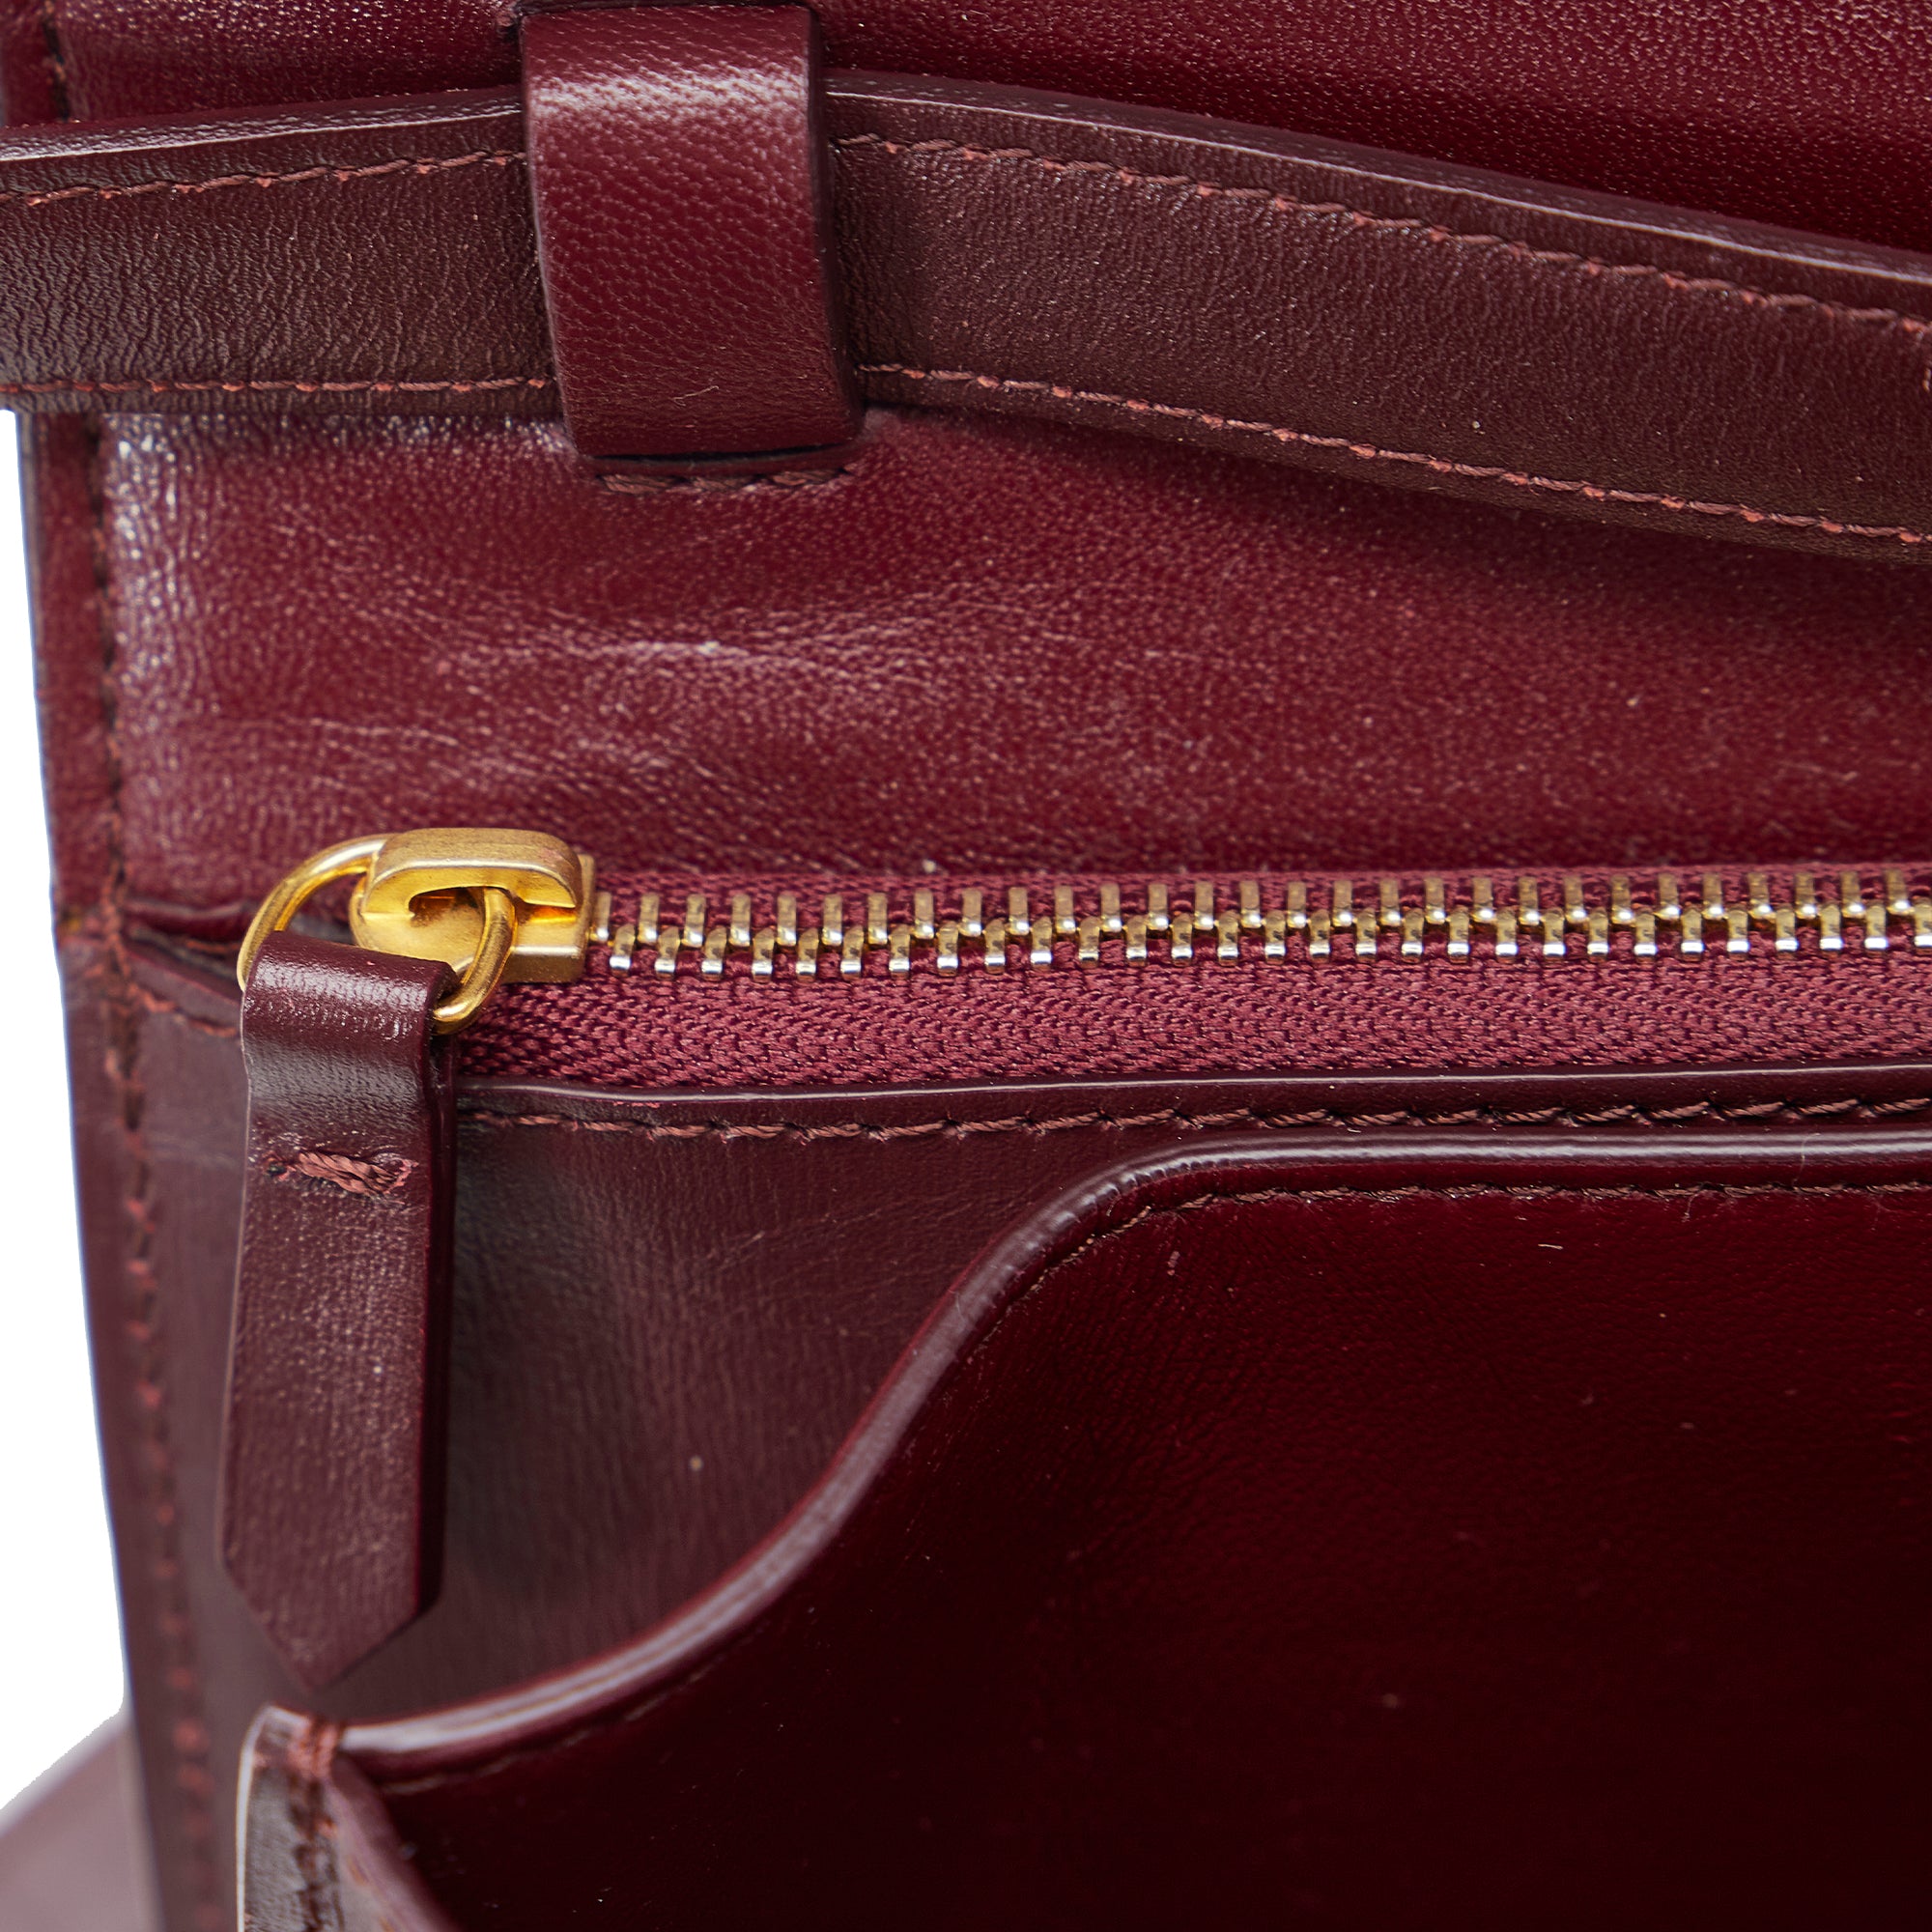 Authentic CELINE Small Classic Box Bag In Red Burgundy Calfskin